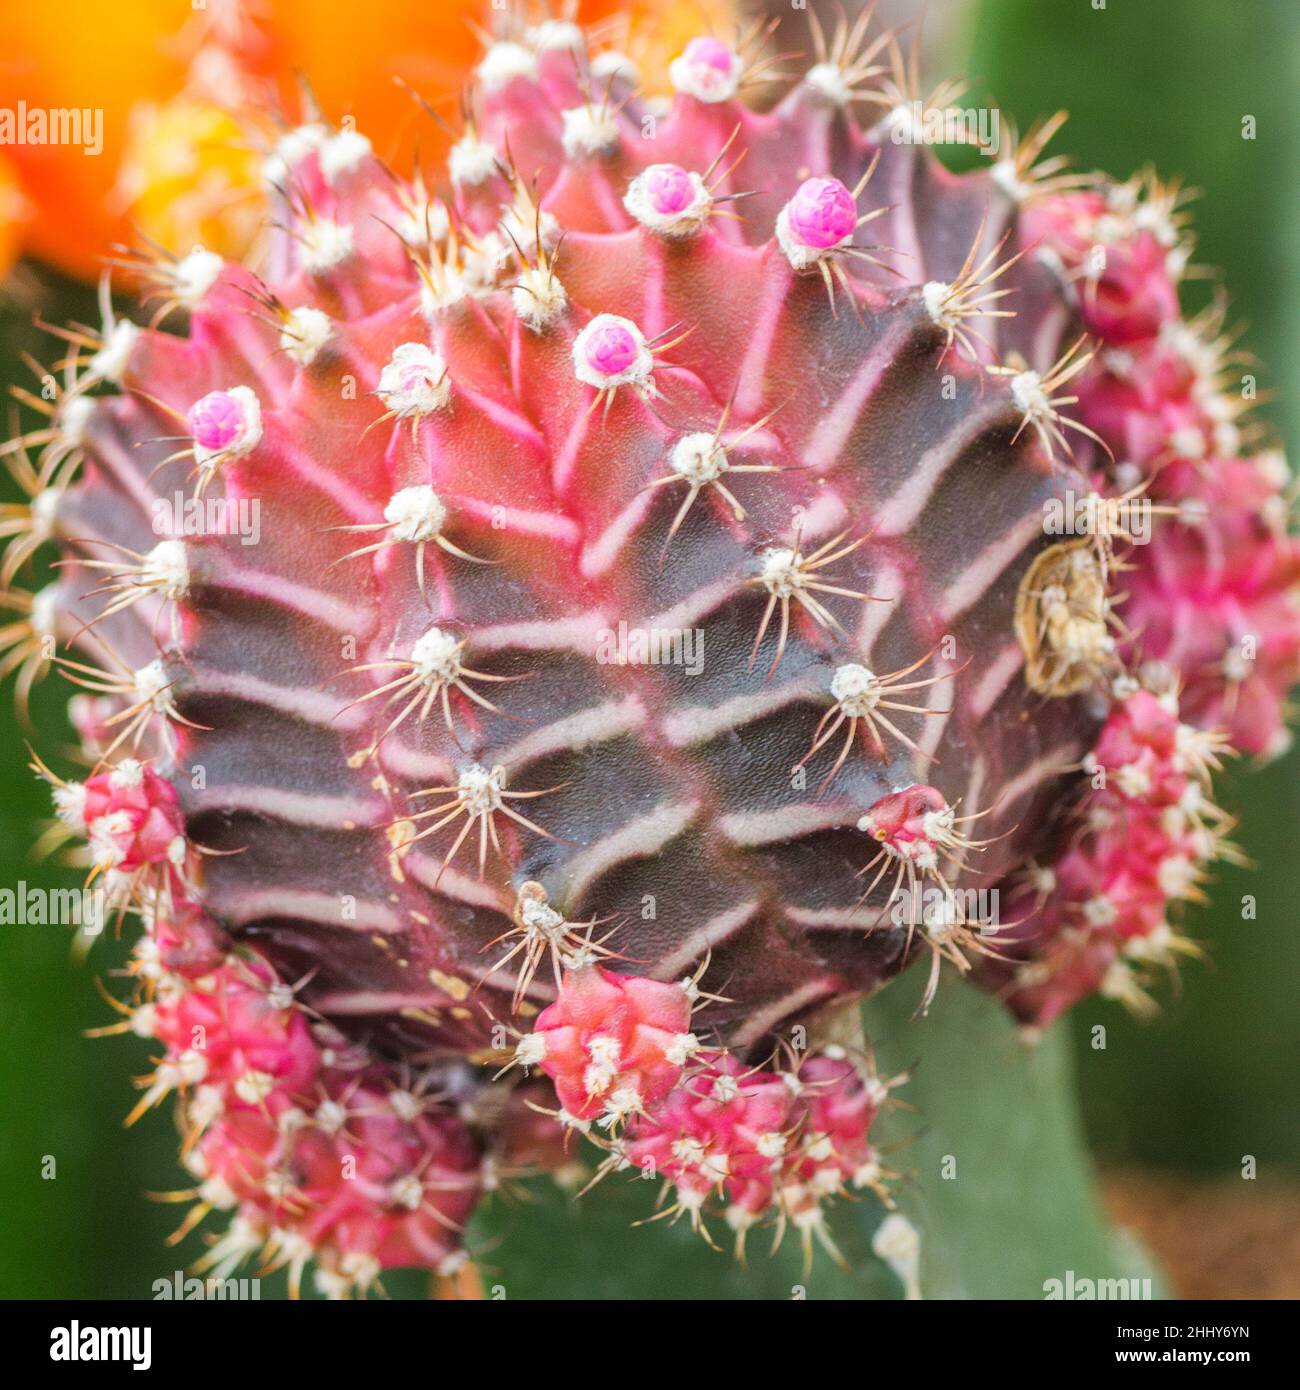 Flowery prickly cactus in close-up view. Stock Photo